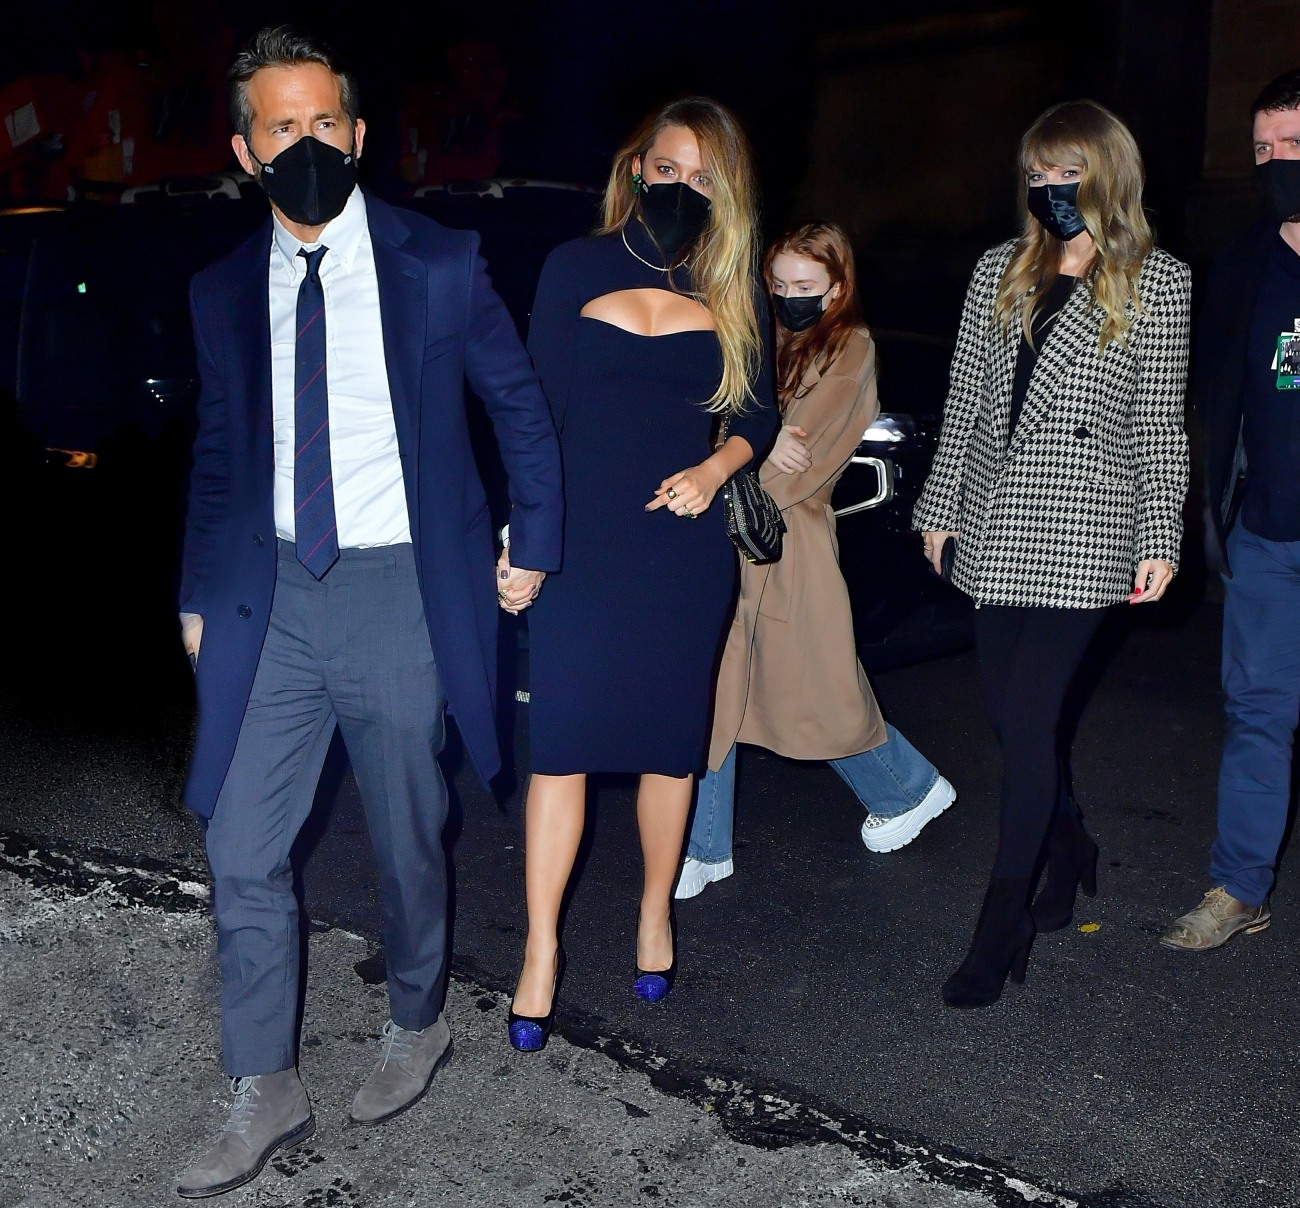 Taylor Swift, Blake Lively, and Ryan Reynolds arrived together at SNL after-party in NYC